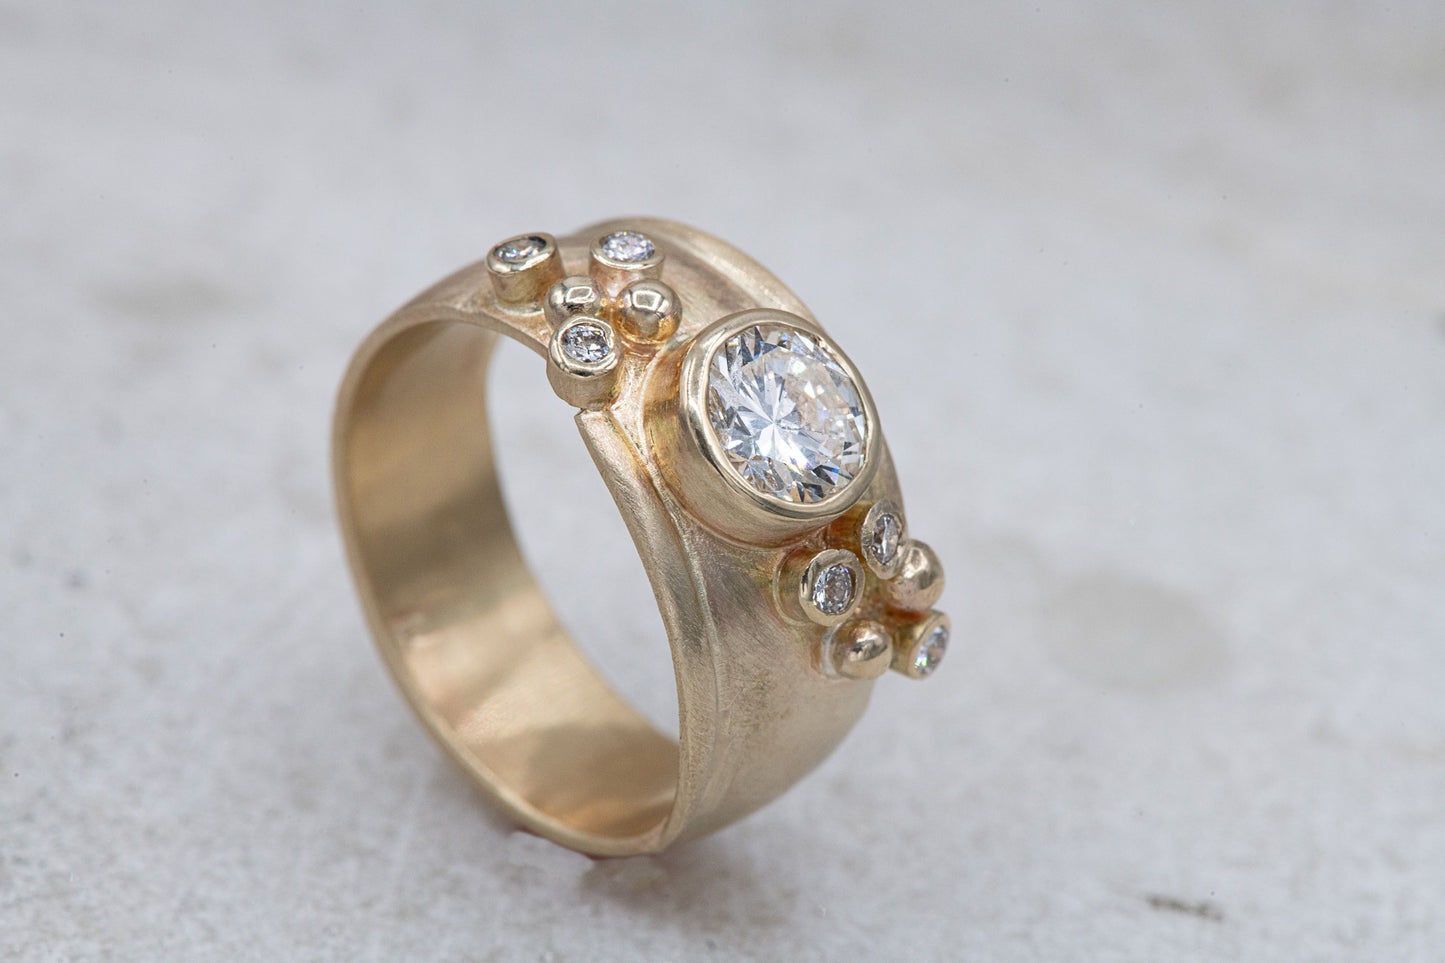 A Wide Forever One Moissanite Gold Ring with a diamond in the center, handcrafted by Cassin Jewelry.